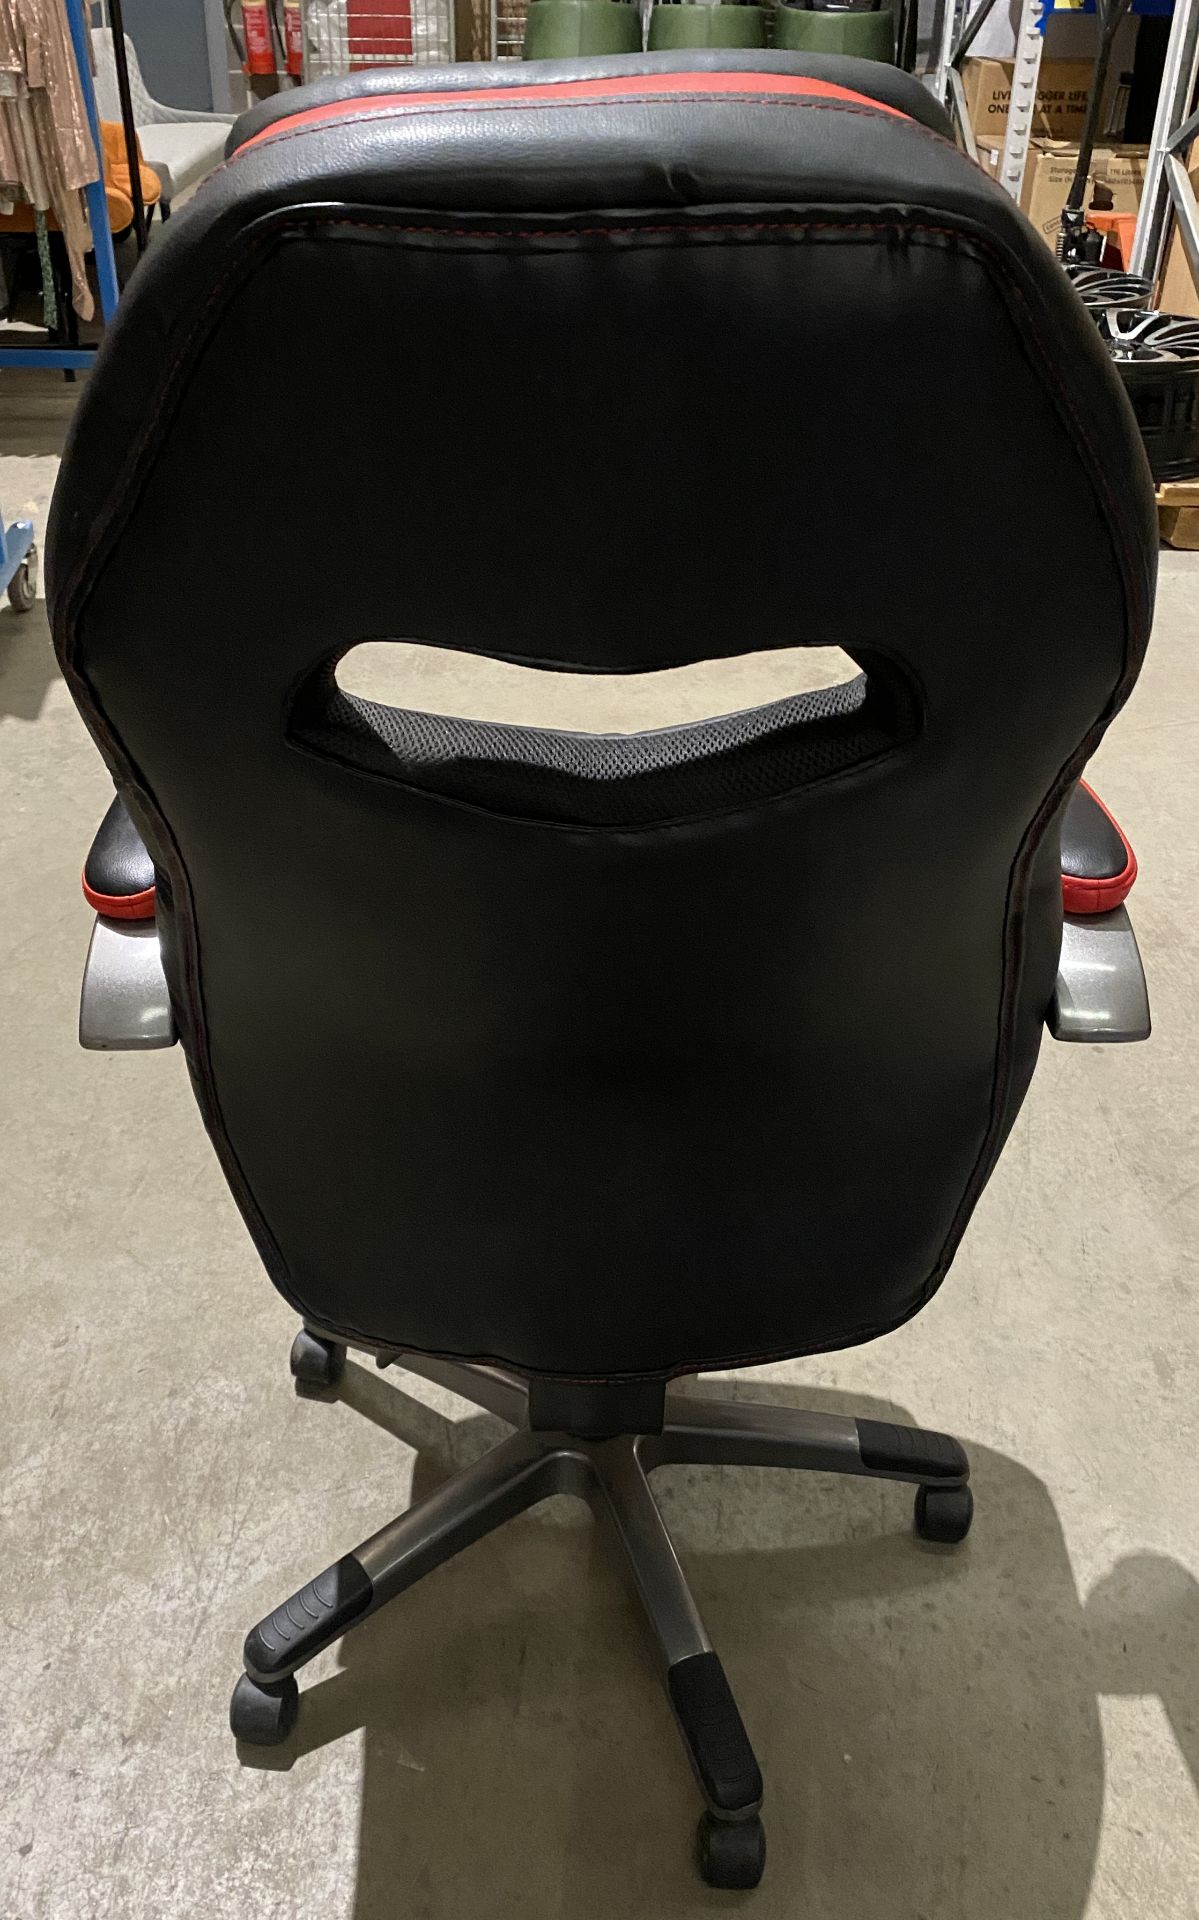 Black and red leather upholstered swivel armchair/gaming chair (Saleroom location: Aisle 1) - Image 4 of 4